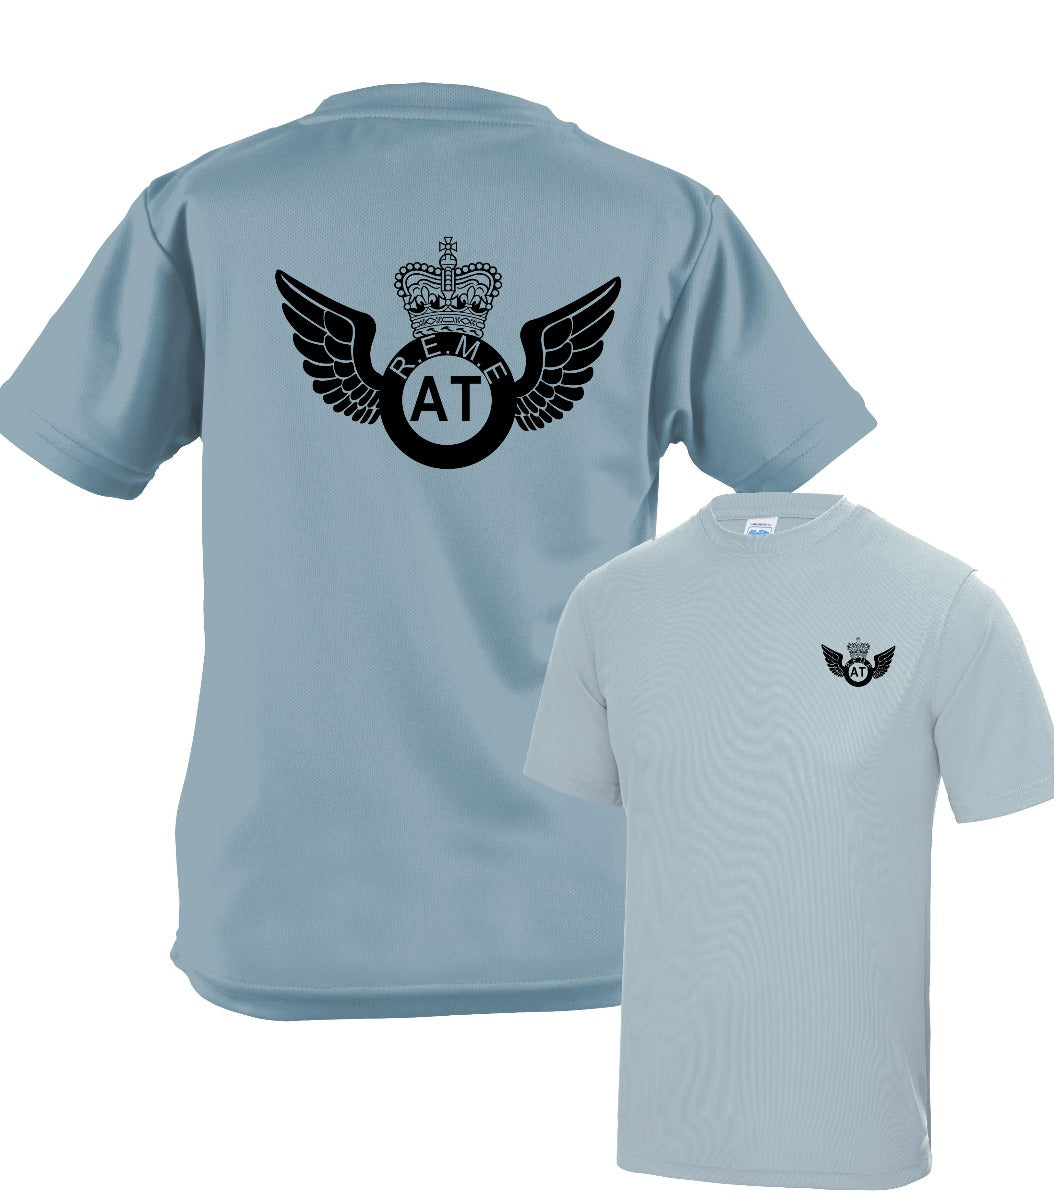 Double Printed AT Wings Wicking T-Shirt